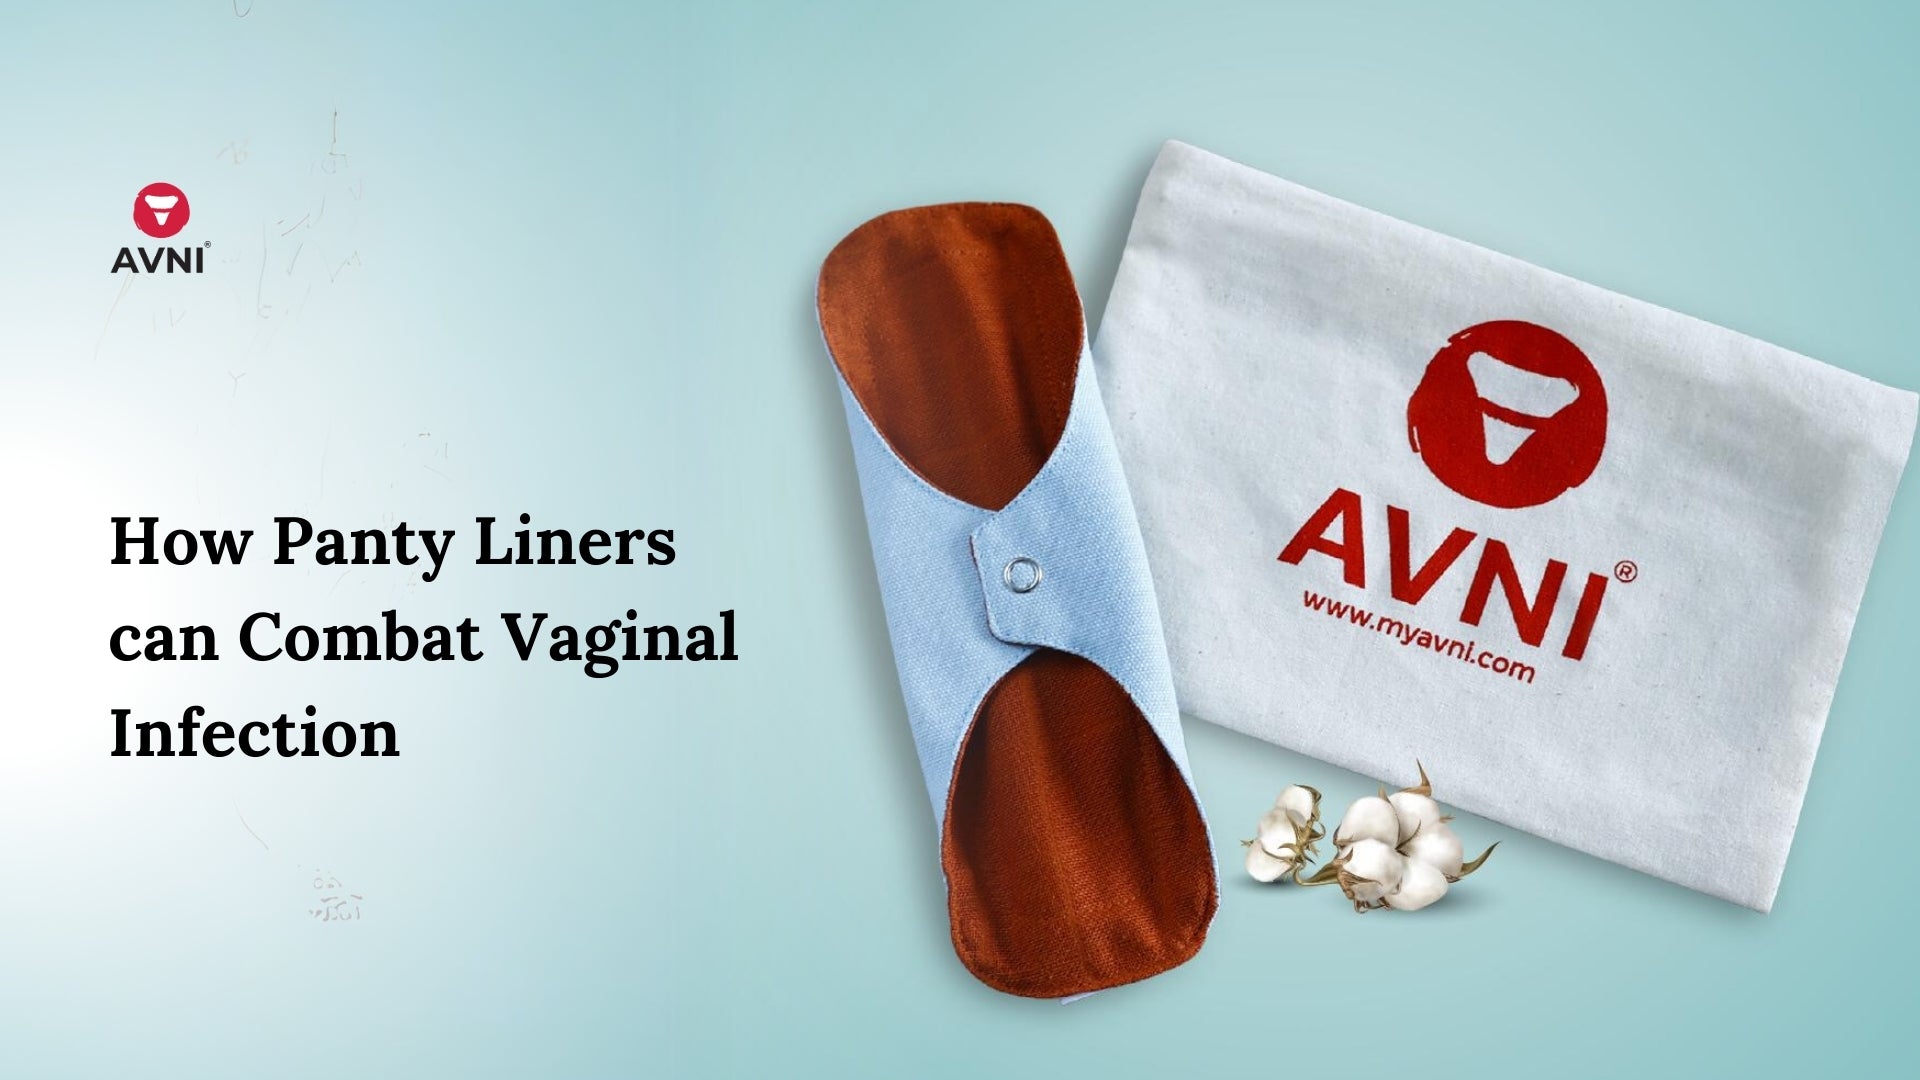 Avni Fluff - Antimicrobial Dry Feel Reusable Panty Liner (Trial pack)